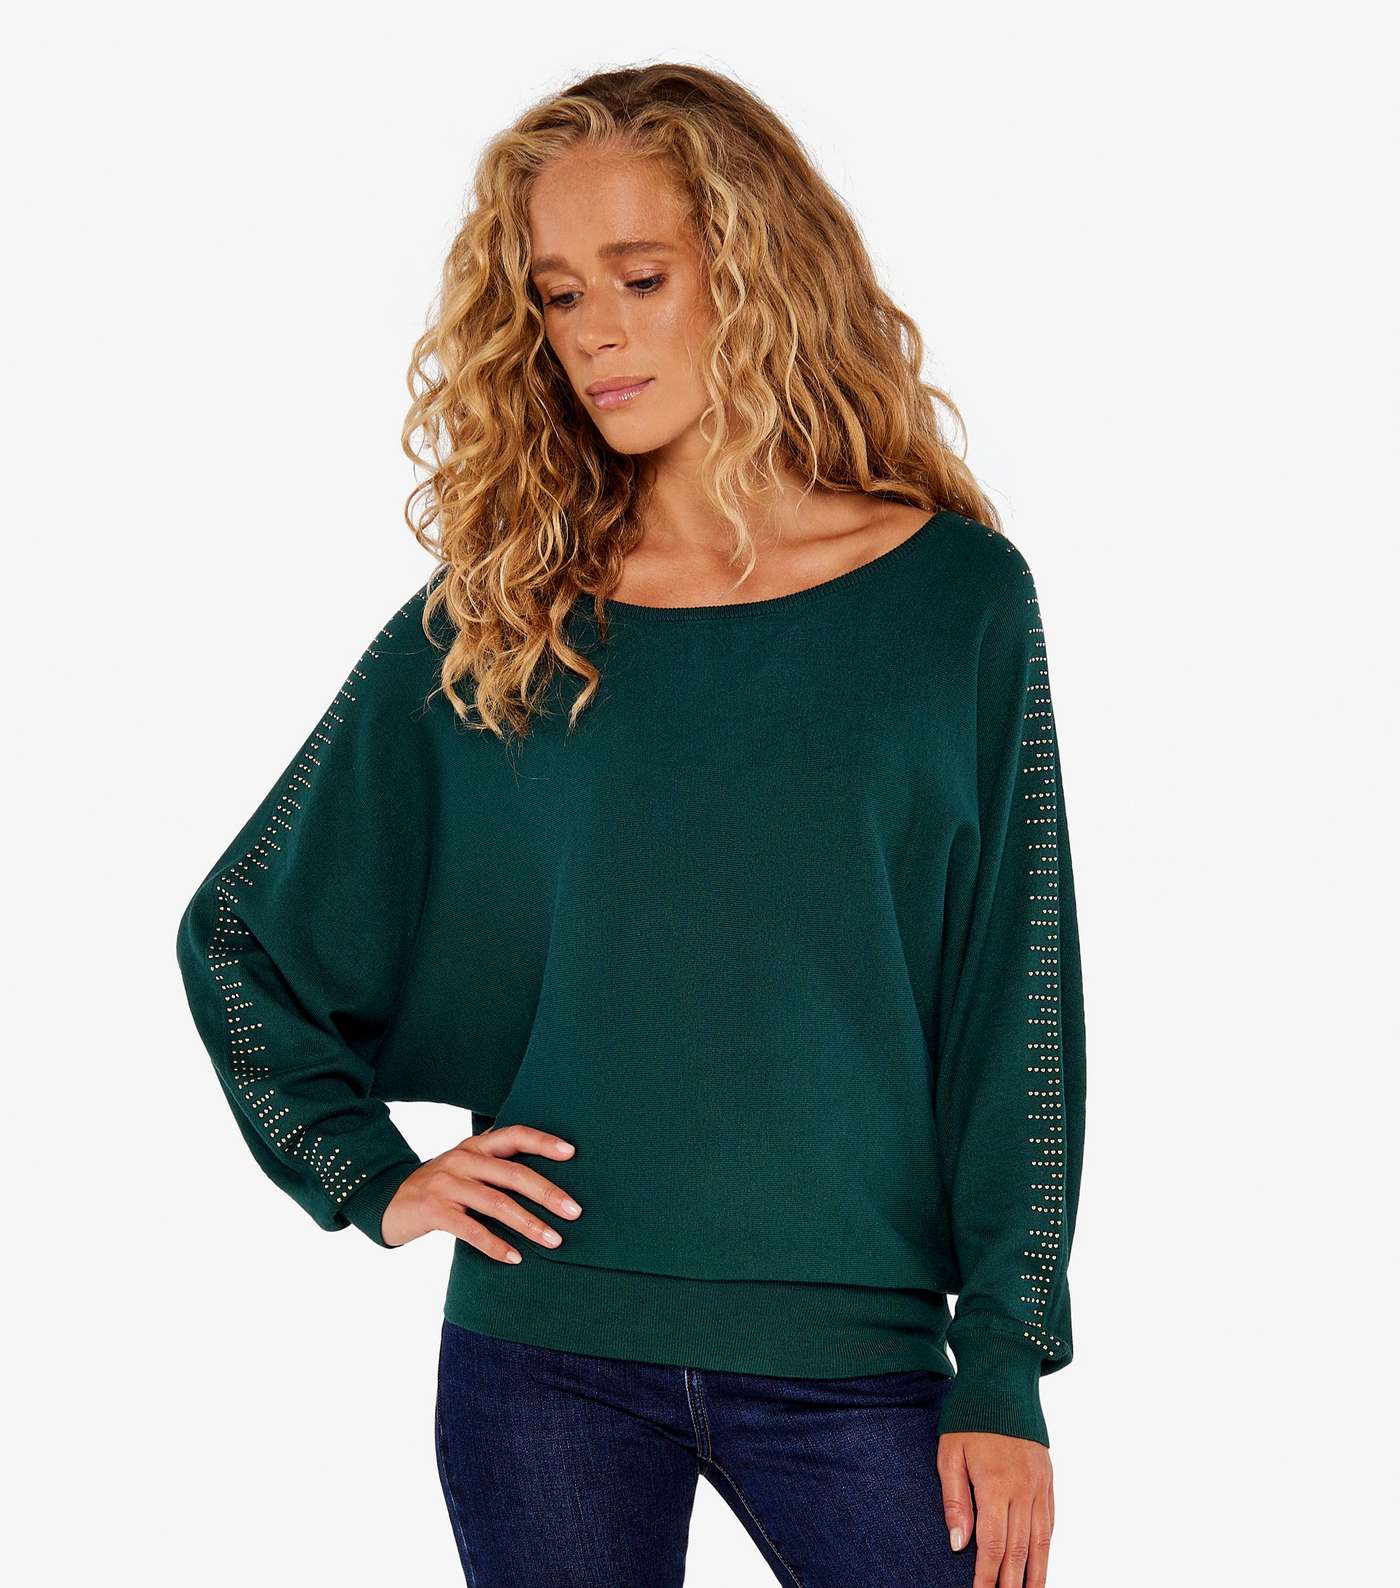 Batwing Sleeve Pointelle Knit Crop Top in Pea Green - Retro, Indie and  Unique Fashion